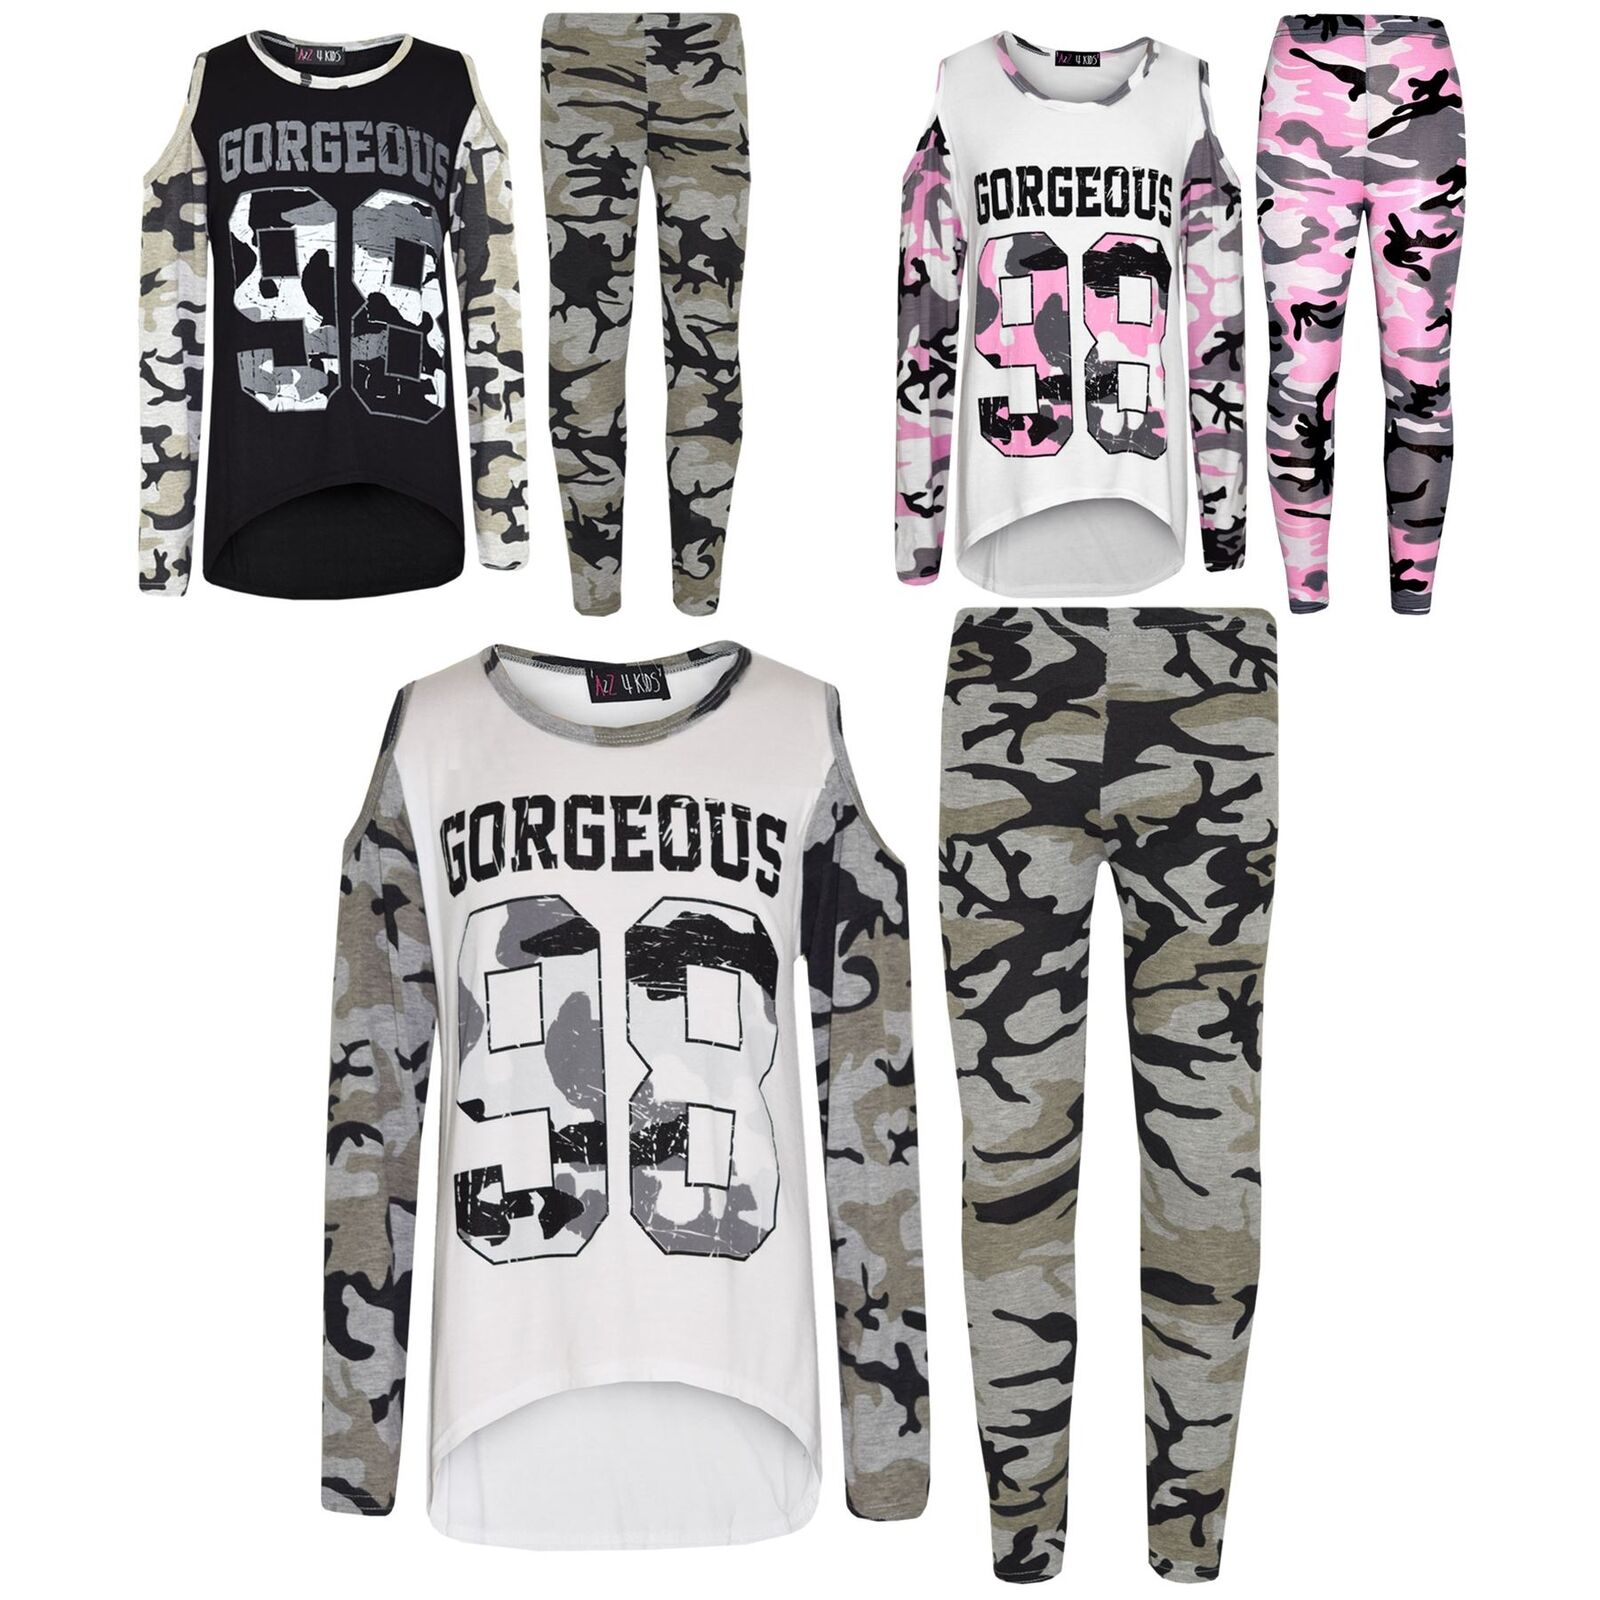 Girls Tops Kids Gorgeous 98 supreme Selling and selling Camouflage & Shirt Top Print Leggi T